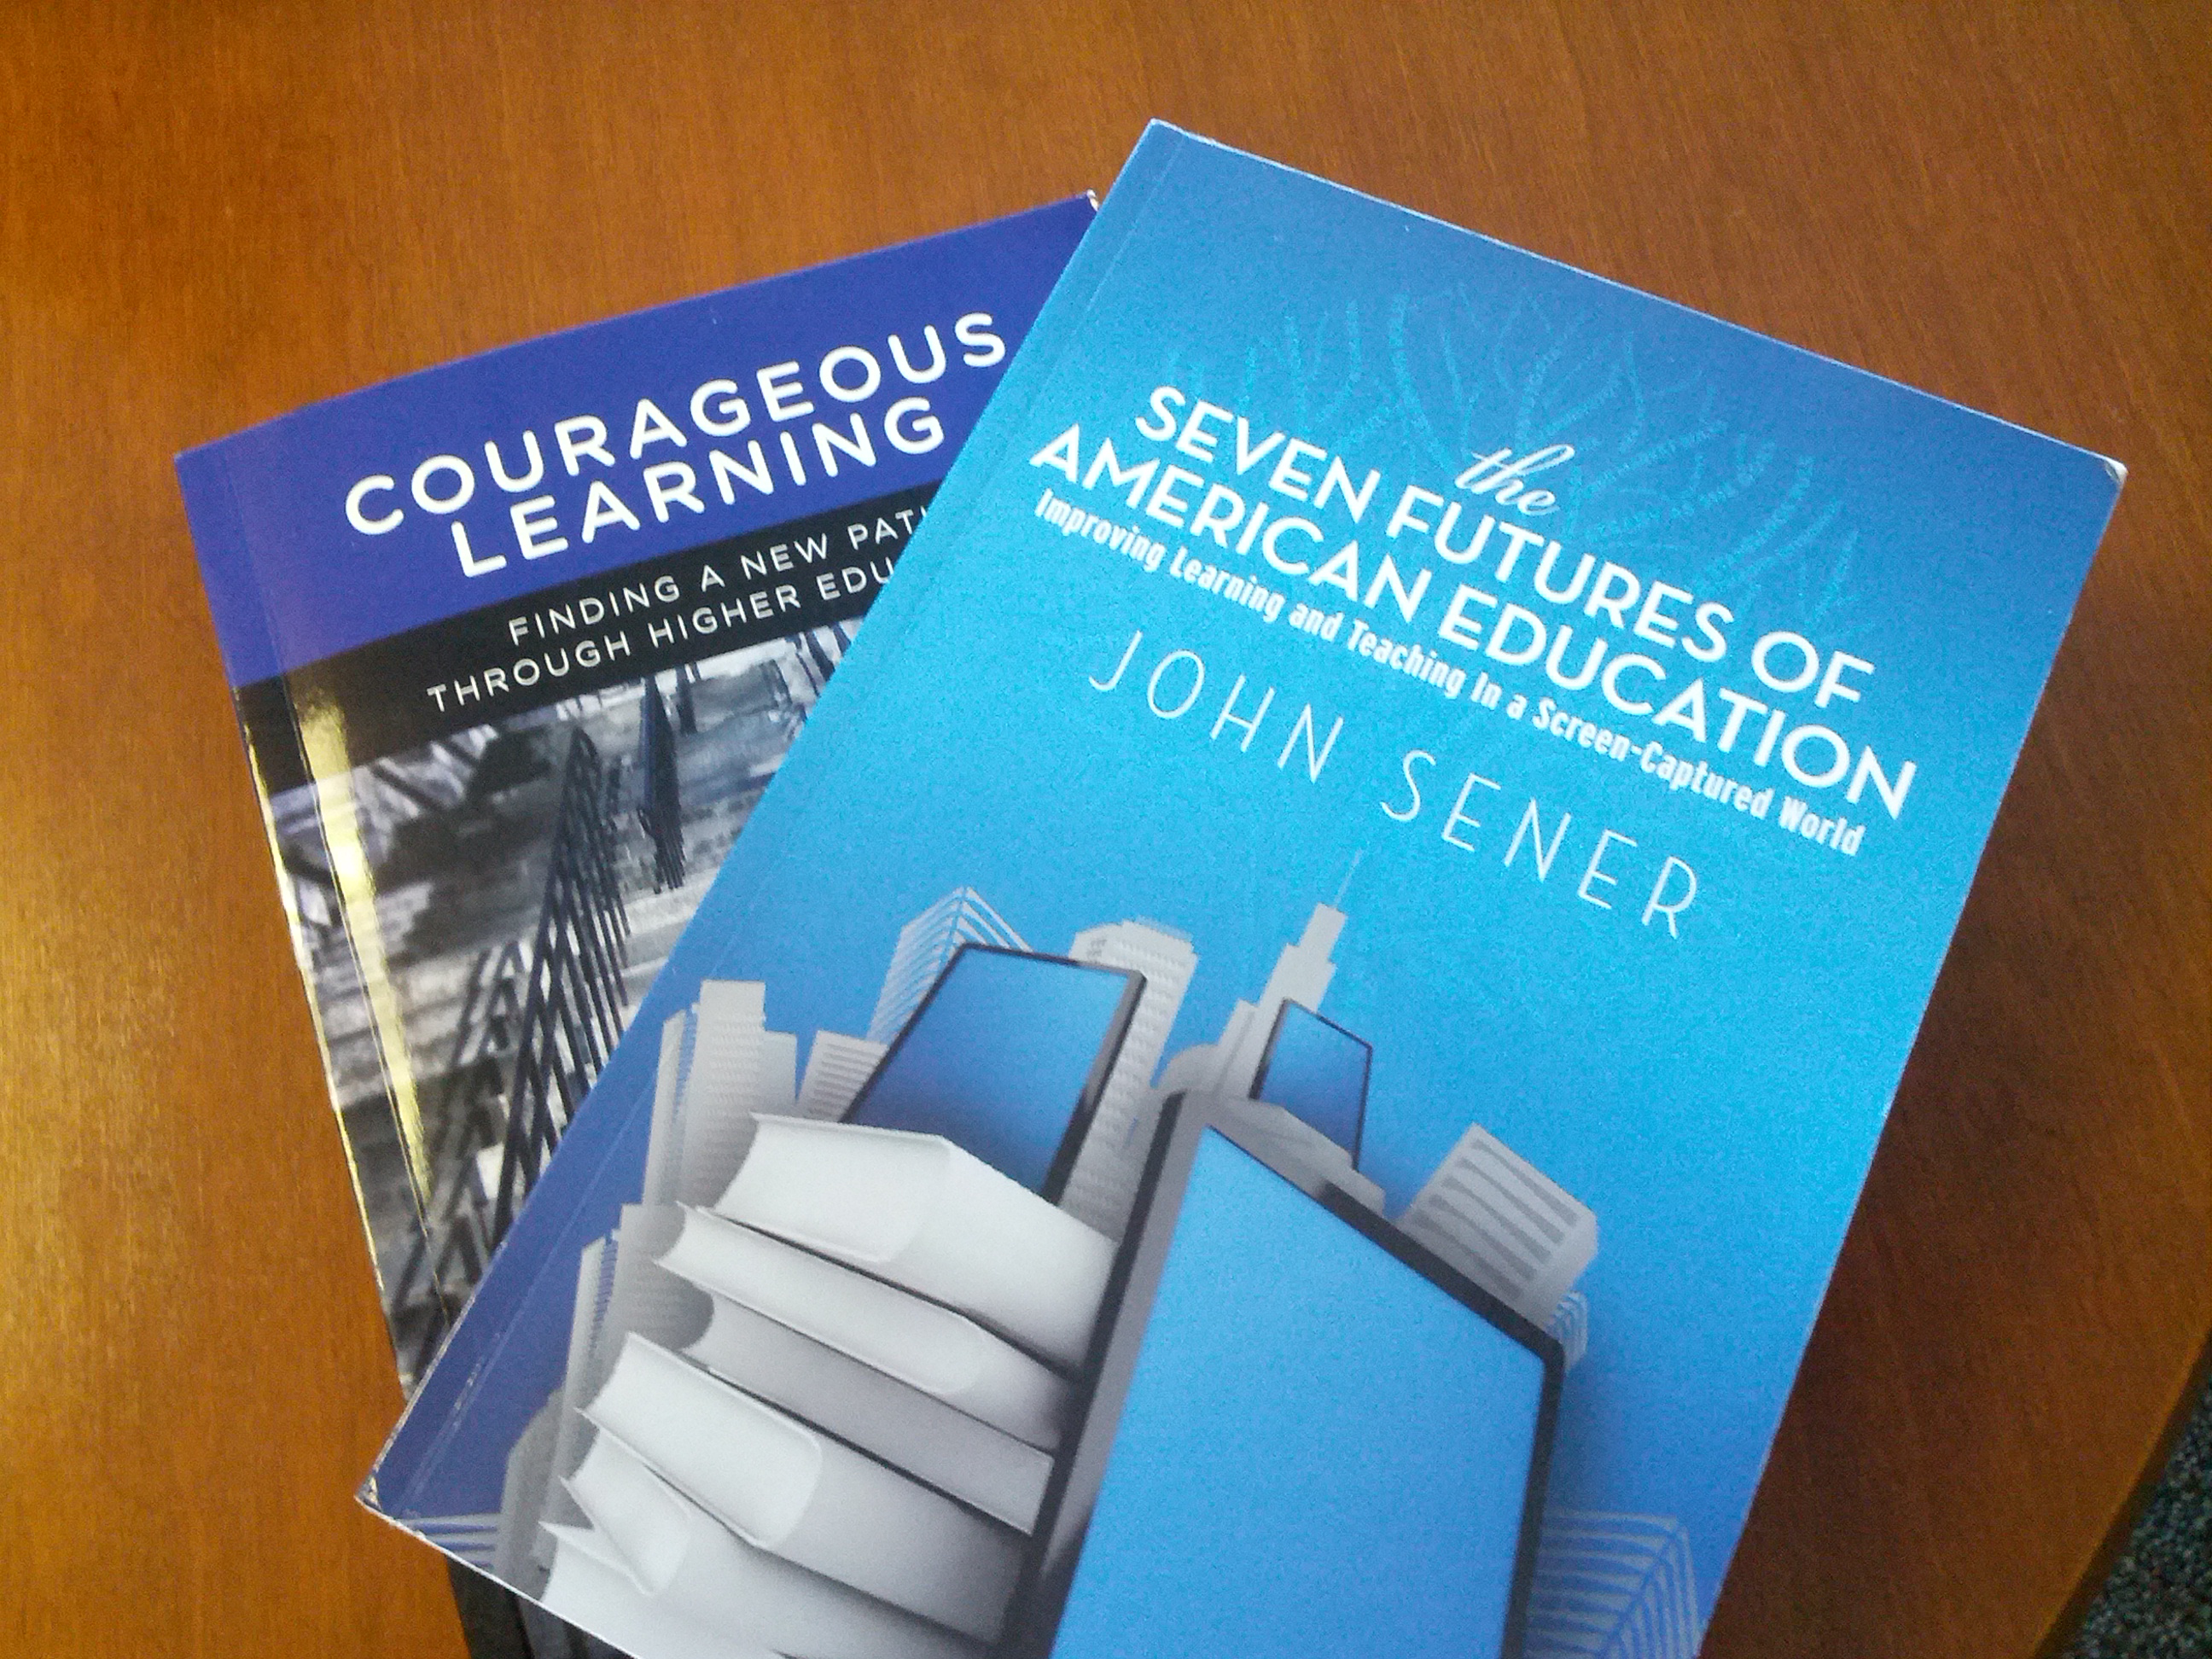 A photo of the first two books mentioned in this blog.